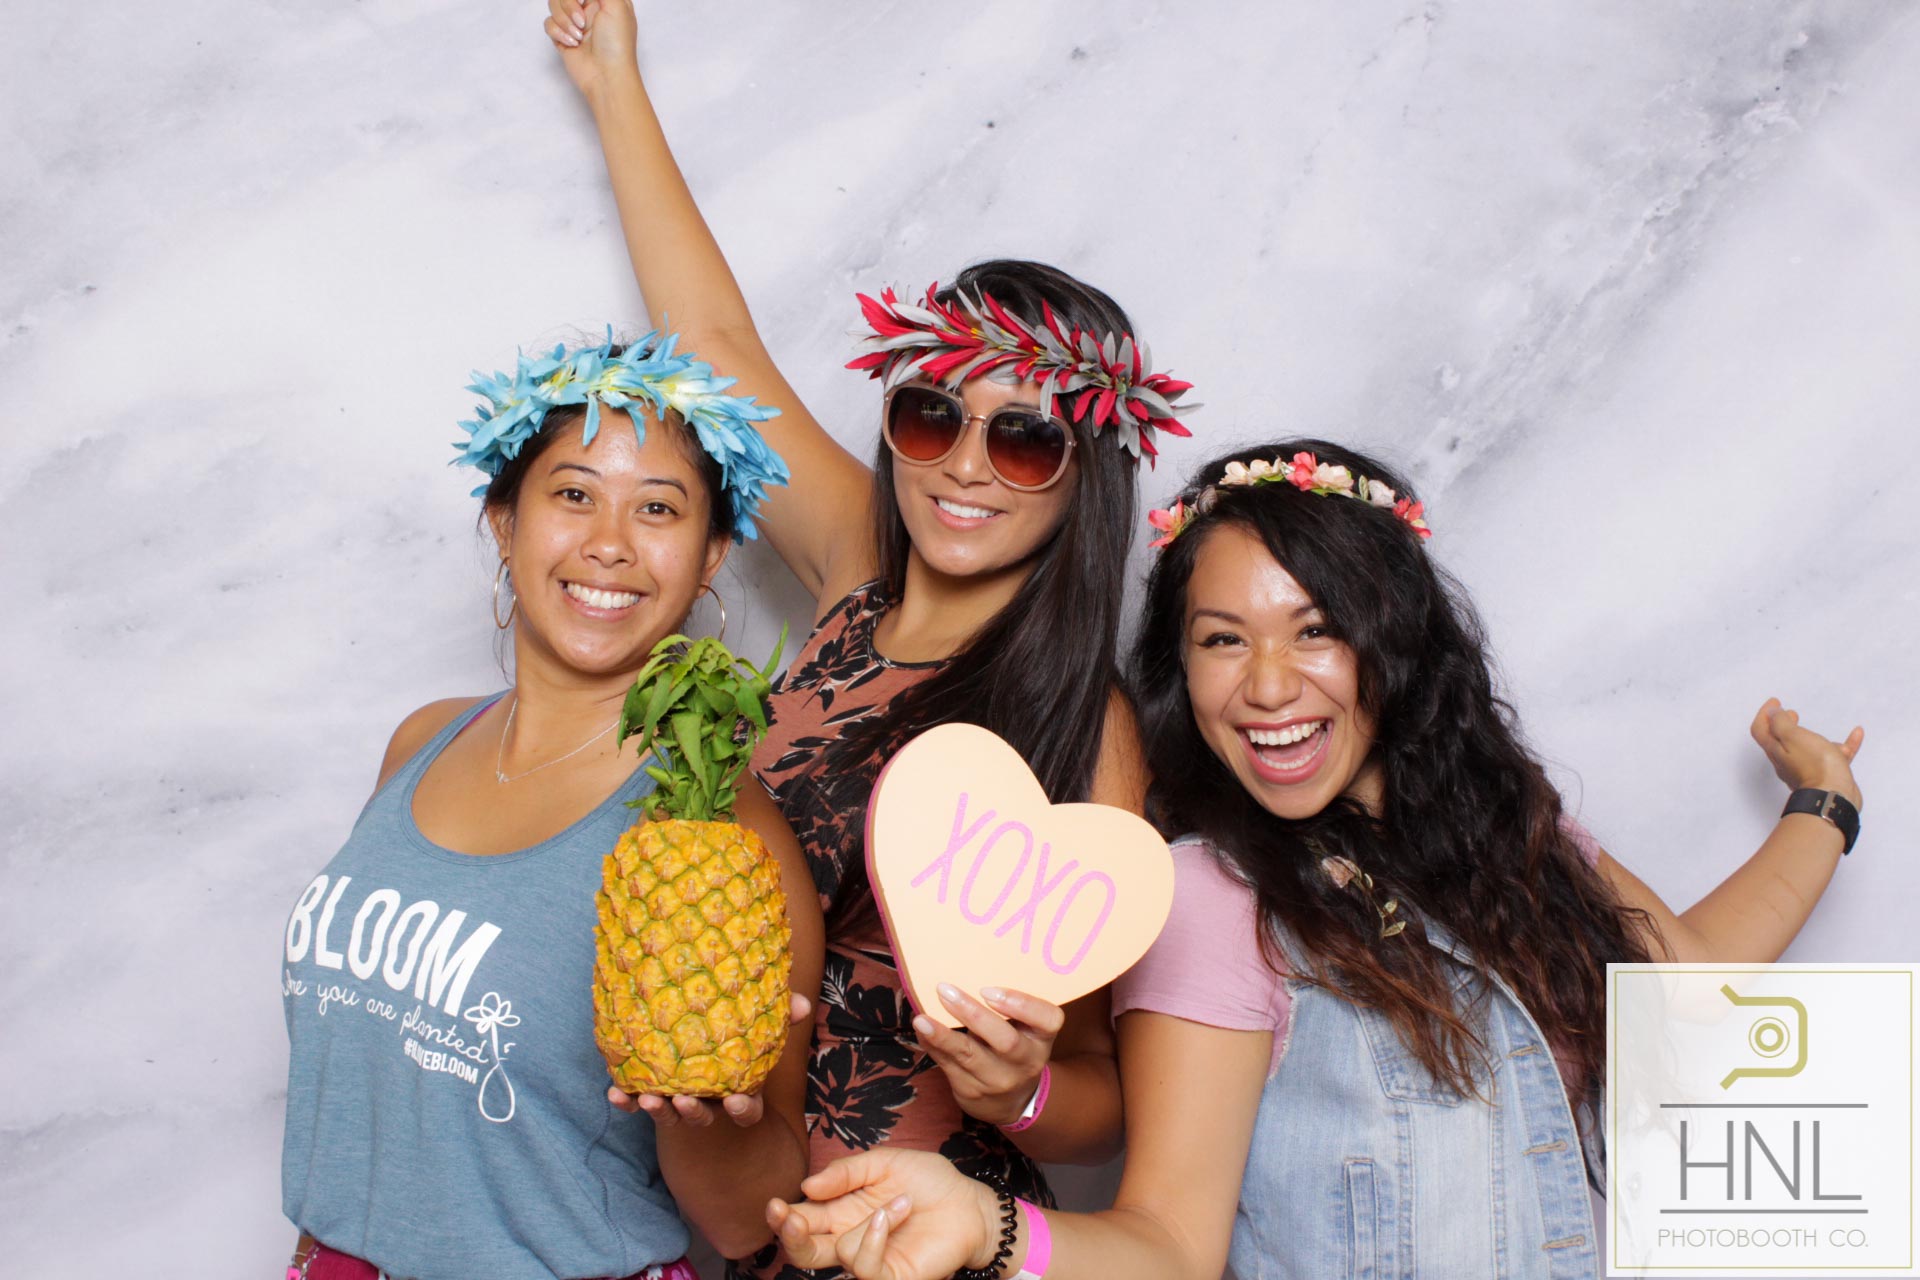 Bloom Conference Blaisdell Concert Hall Oahu Hawaii Photo Booth NEW-302.jpg